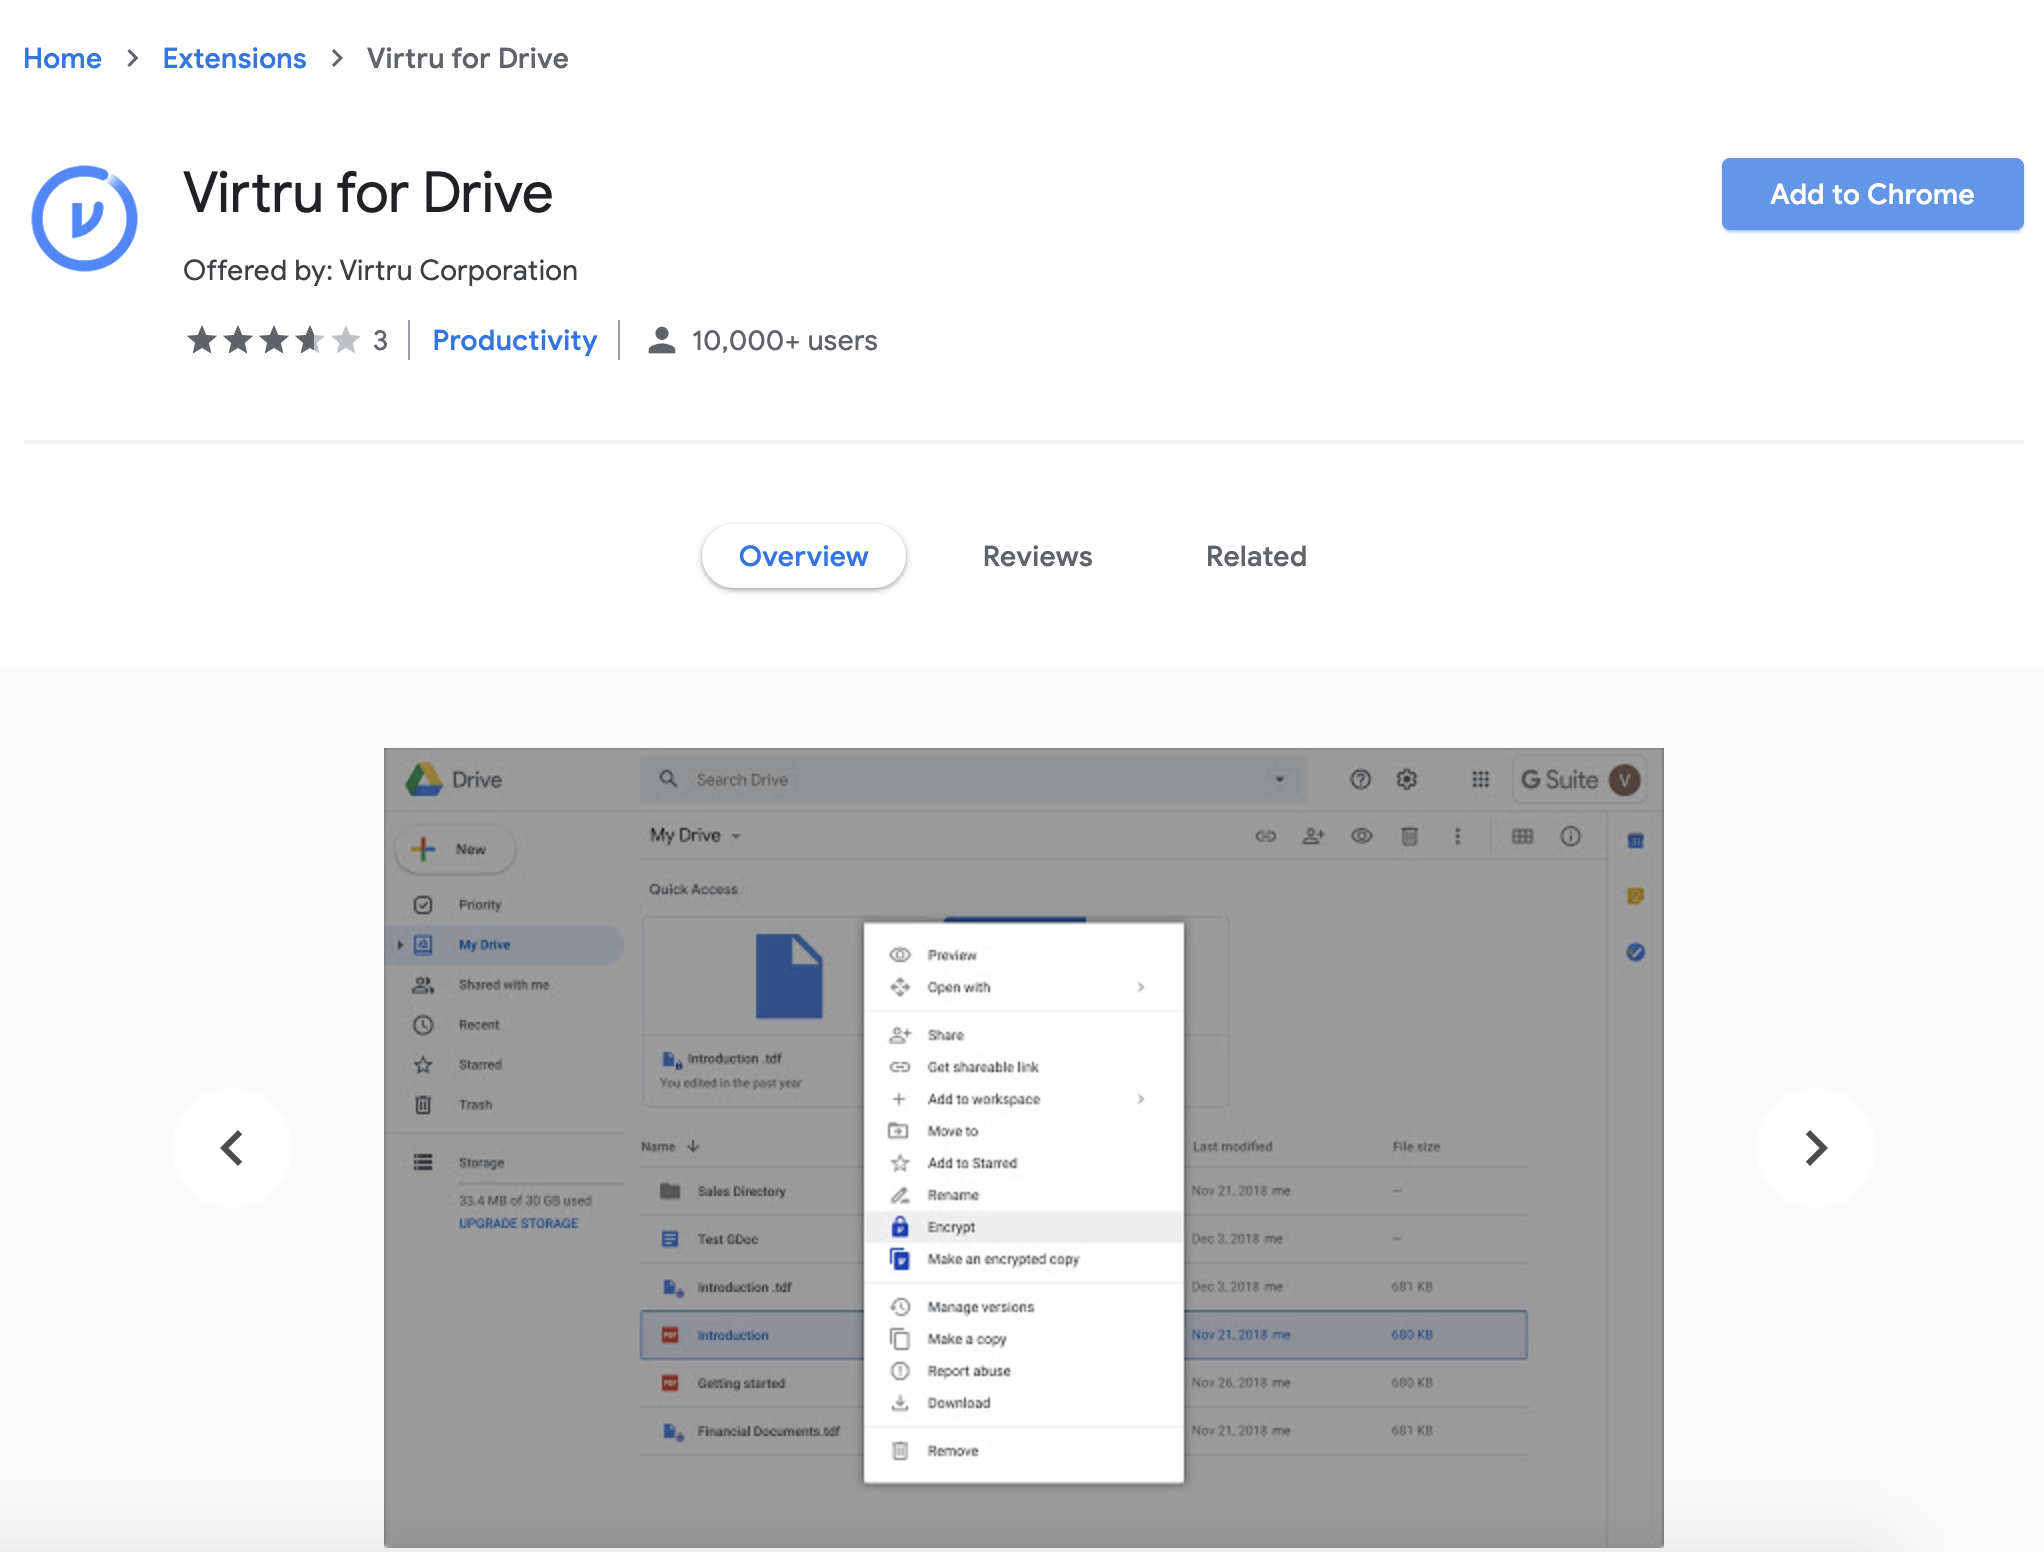 Virtru for Drive in the chrome web store